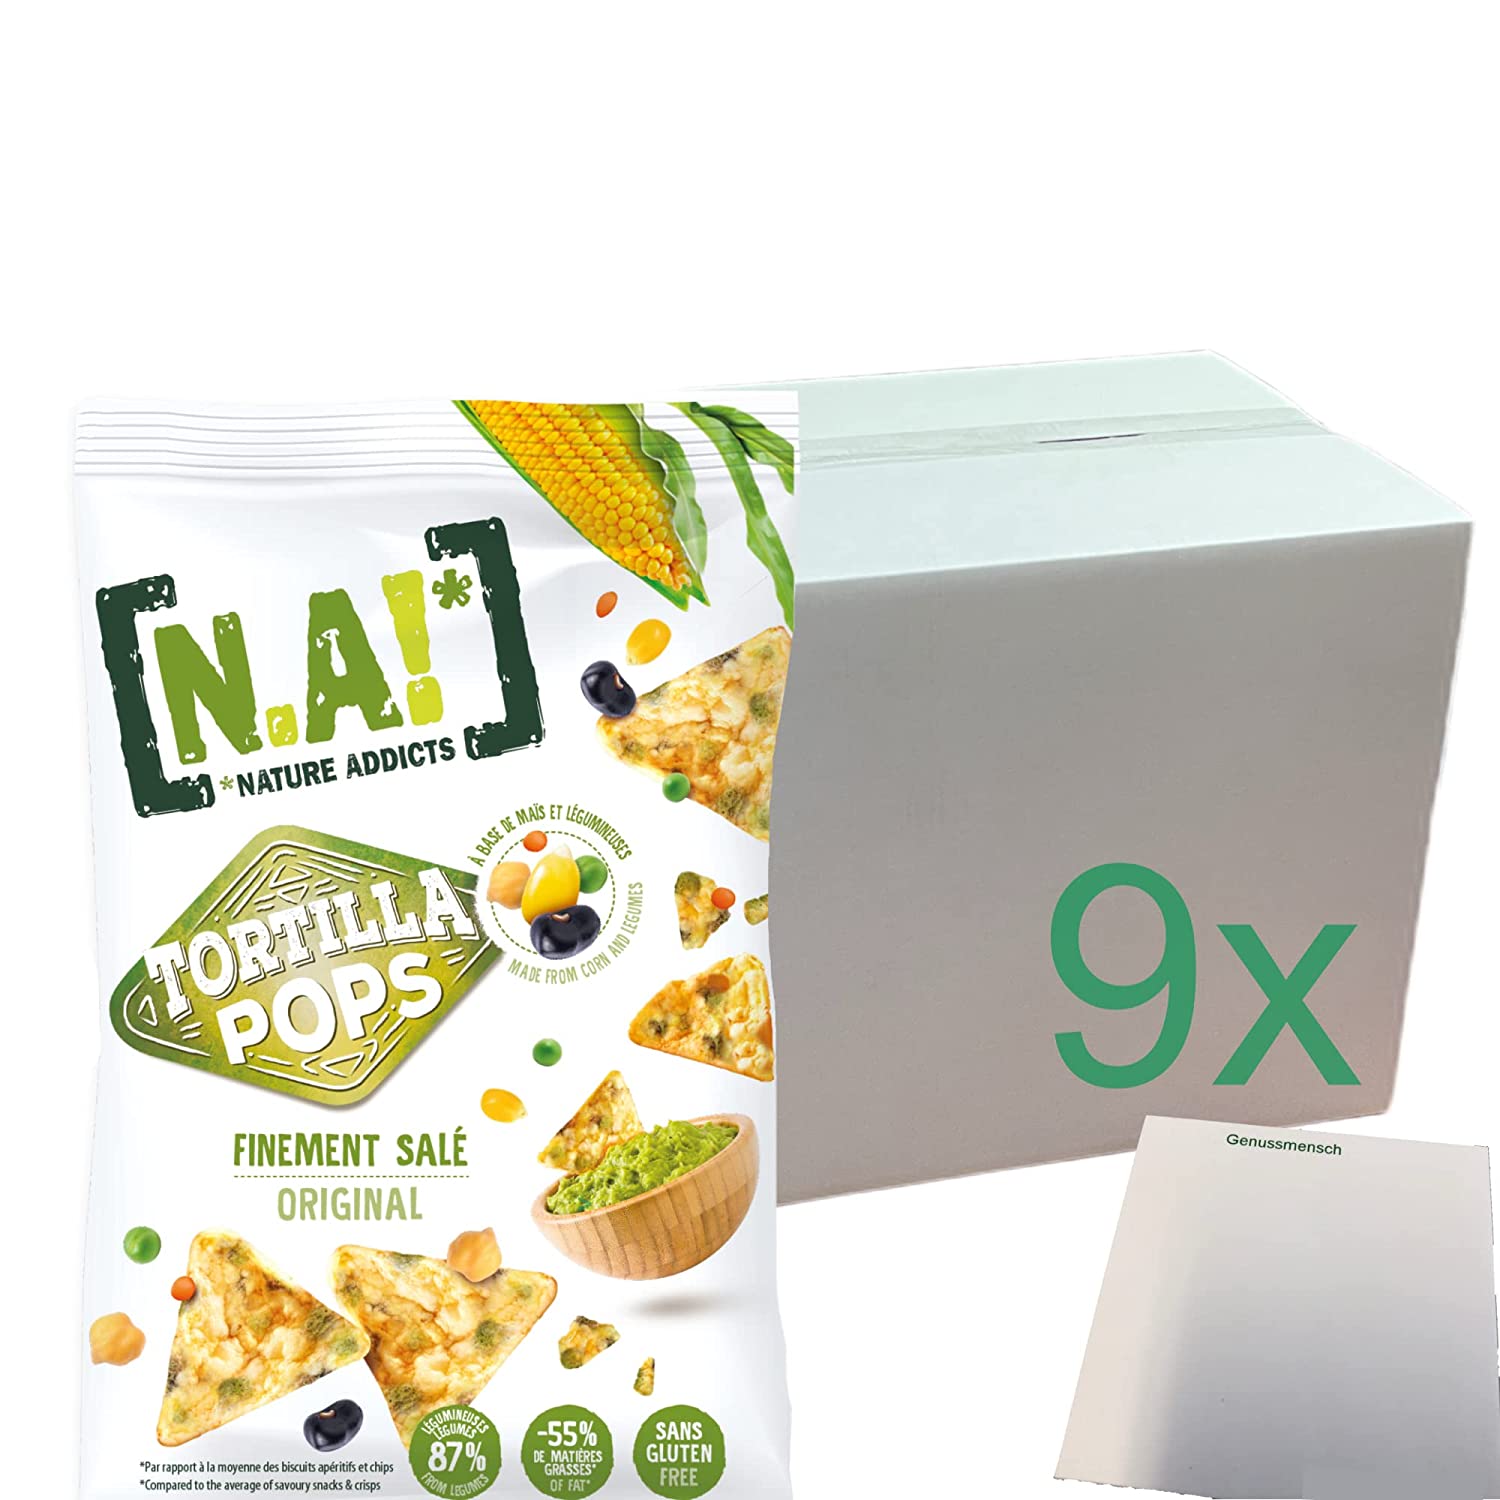 N.A! Tortilla Pops Finement Salé (12x80g Packung) + usy Block